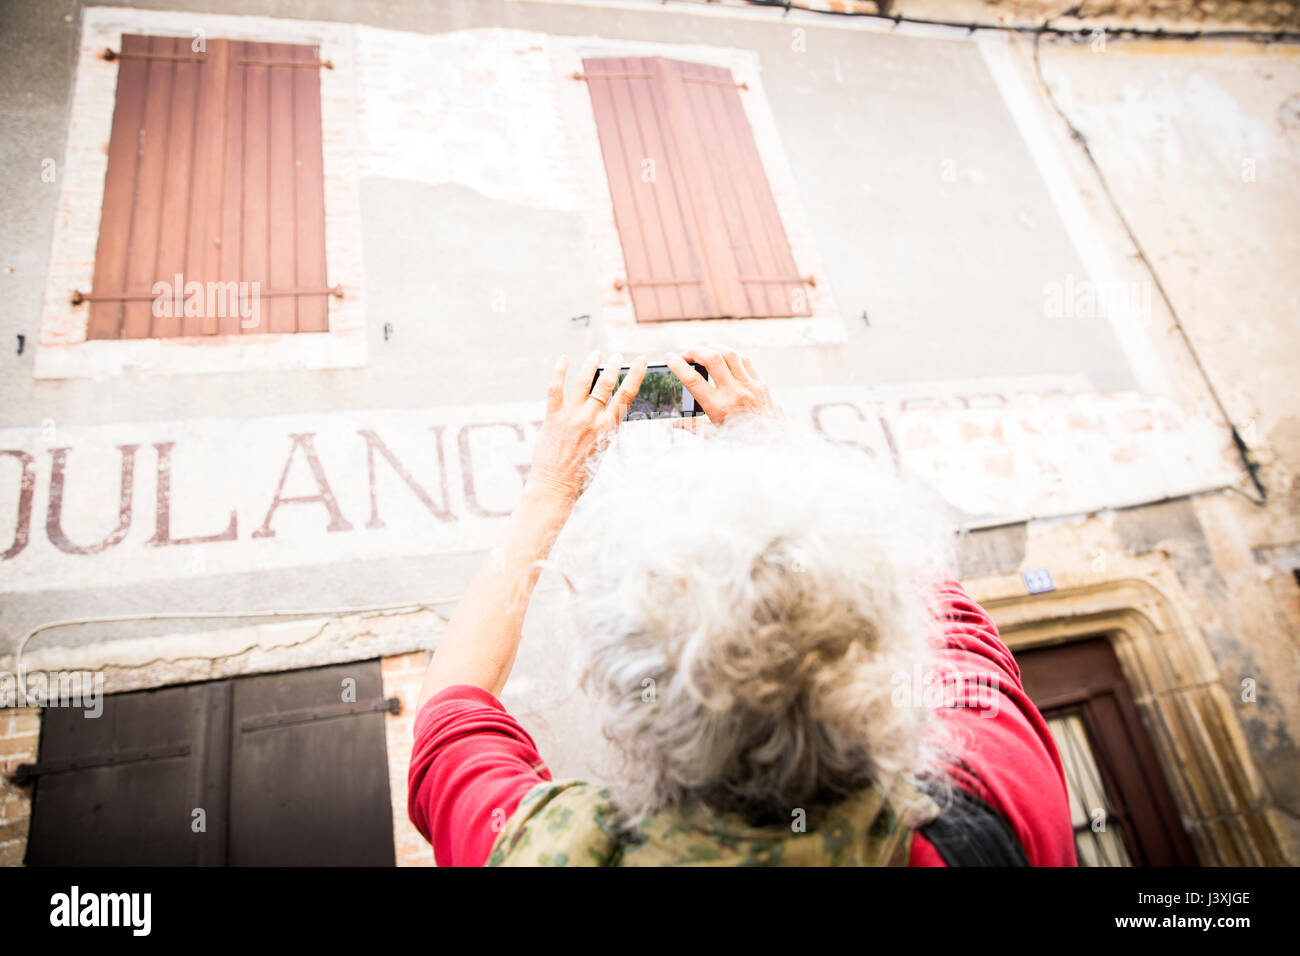 Woman taking photograph of signage on building exterior, Bruniquel, France Stock Photo